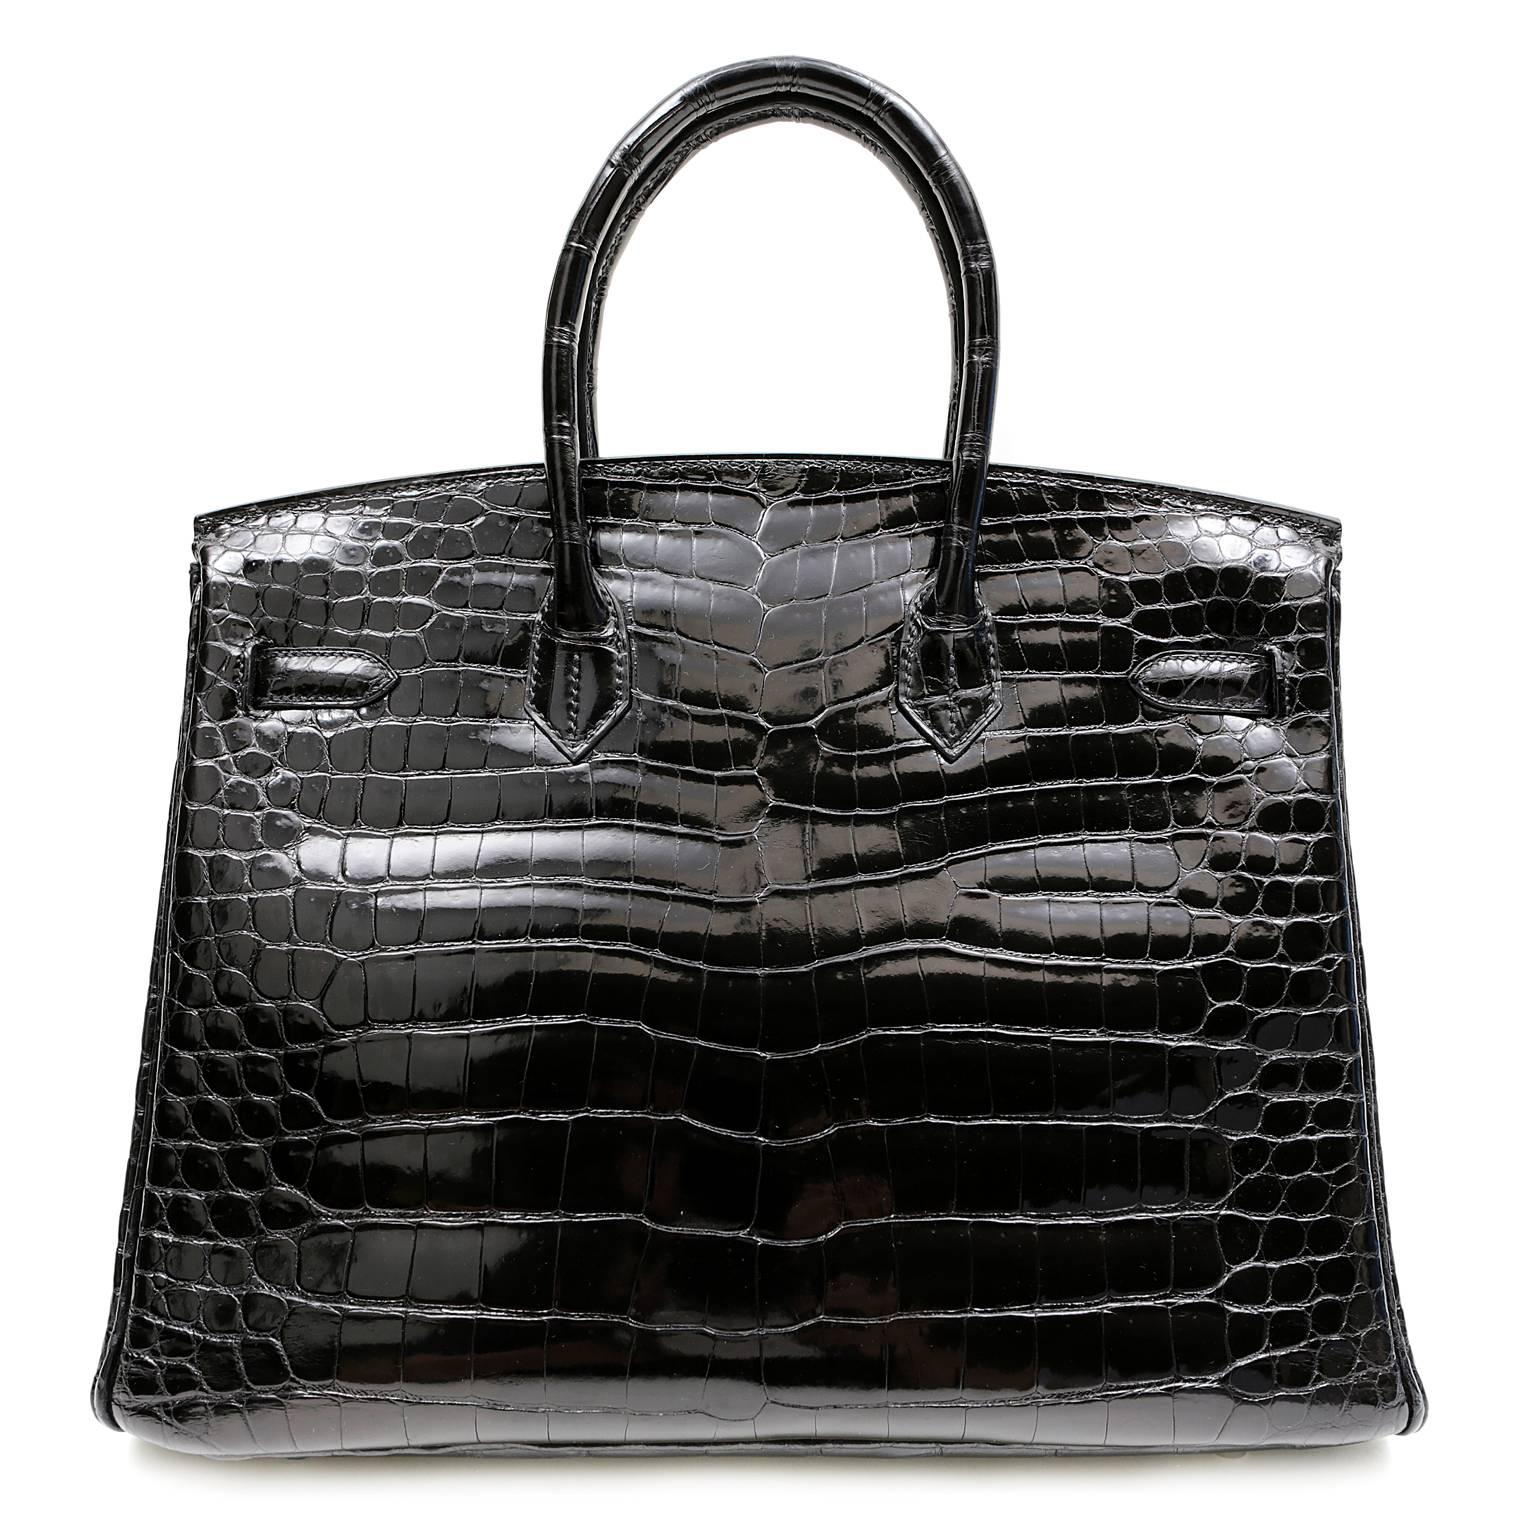 Hermès Black Porosus Crocodile 35 cm Birkin- PRISTINE. Never Carried; plastic on hardware.
    Hermès bags are considered the ultimate luxury item the world over.  Hand stitched by skilled craftsmen, wait lists of a year or more are commonplace